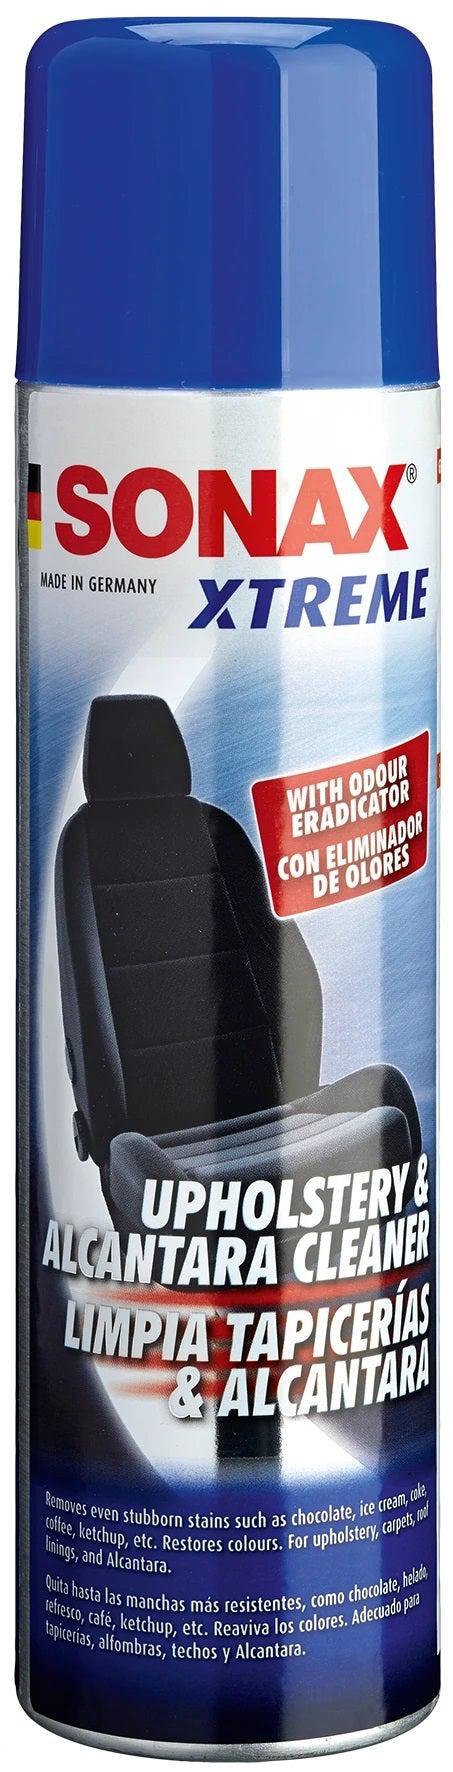 Sonax Xtreme Upholstery & Alcantara Cleaner Foam-SONAX-Detailing Shed